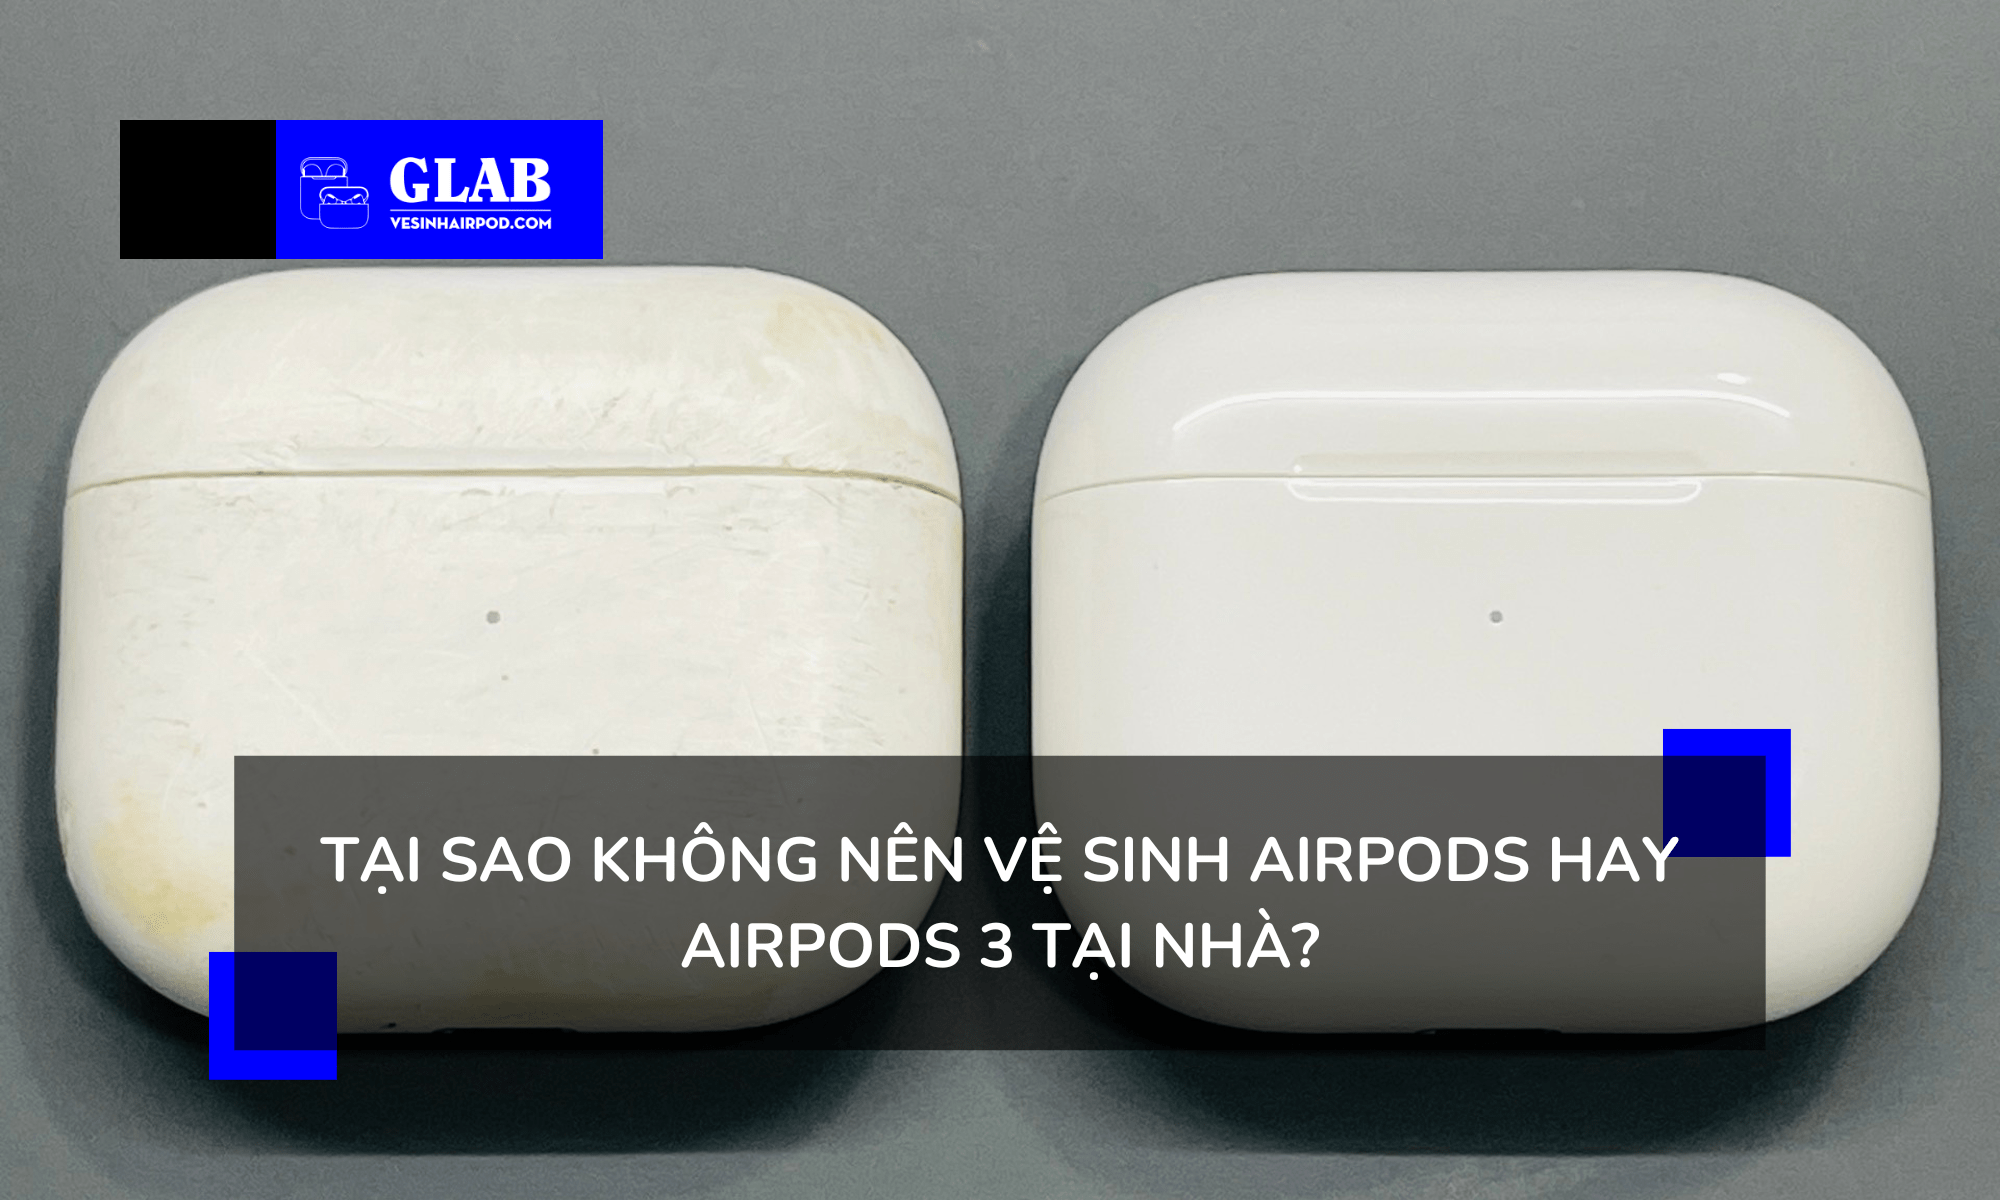 ve-sinh-airpods-3-chinh-hang